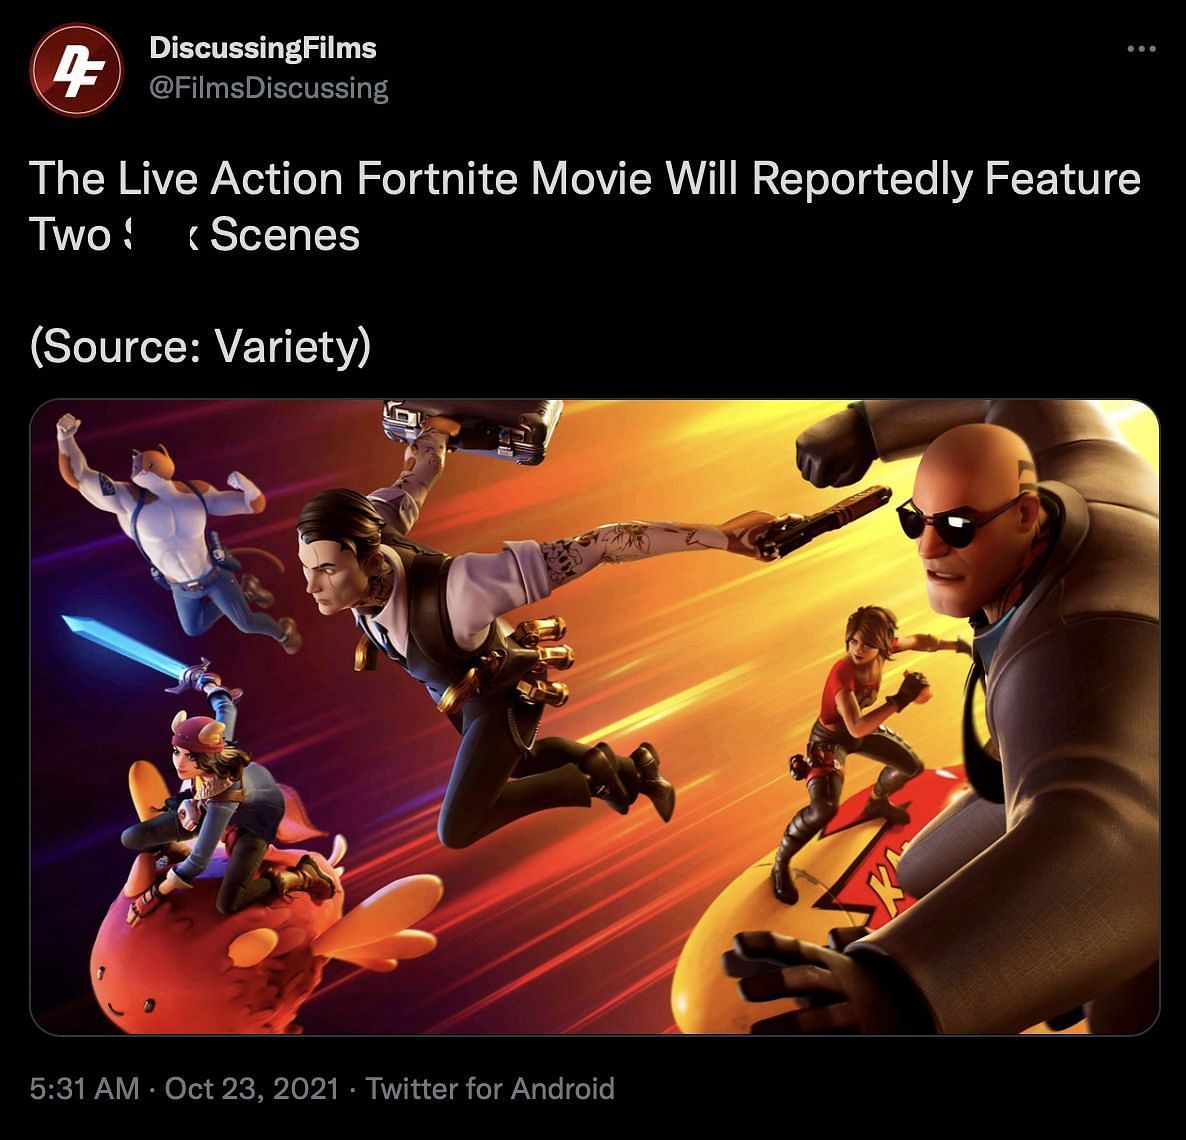 Upcoming Fortnite movie to feature 2 controversial scenes (Image via DiscussingFilms/Twitter)